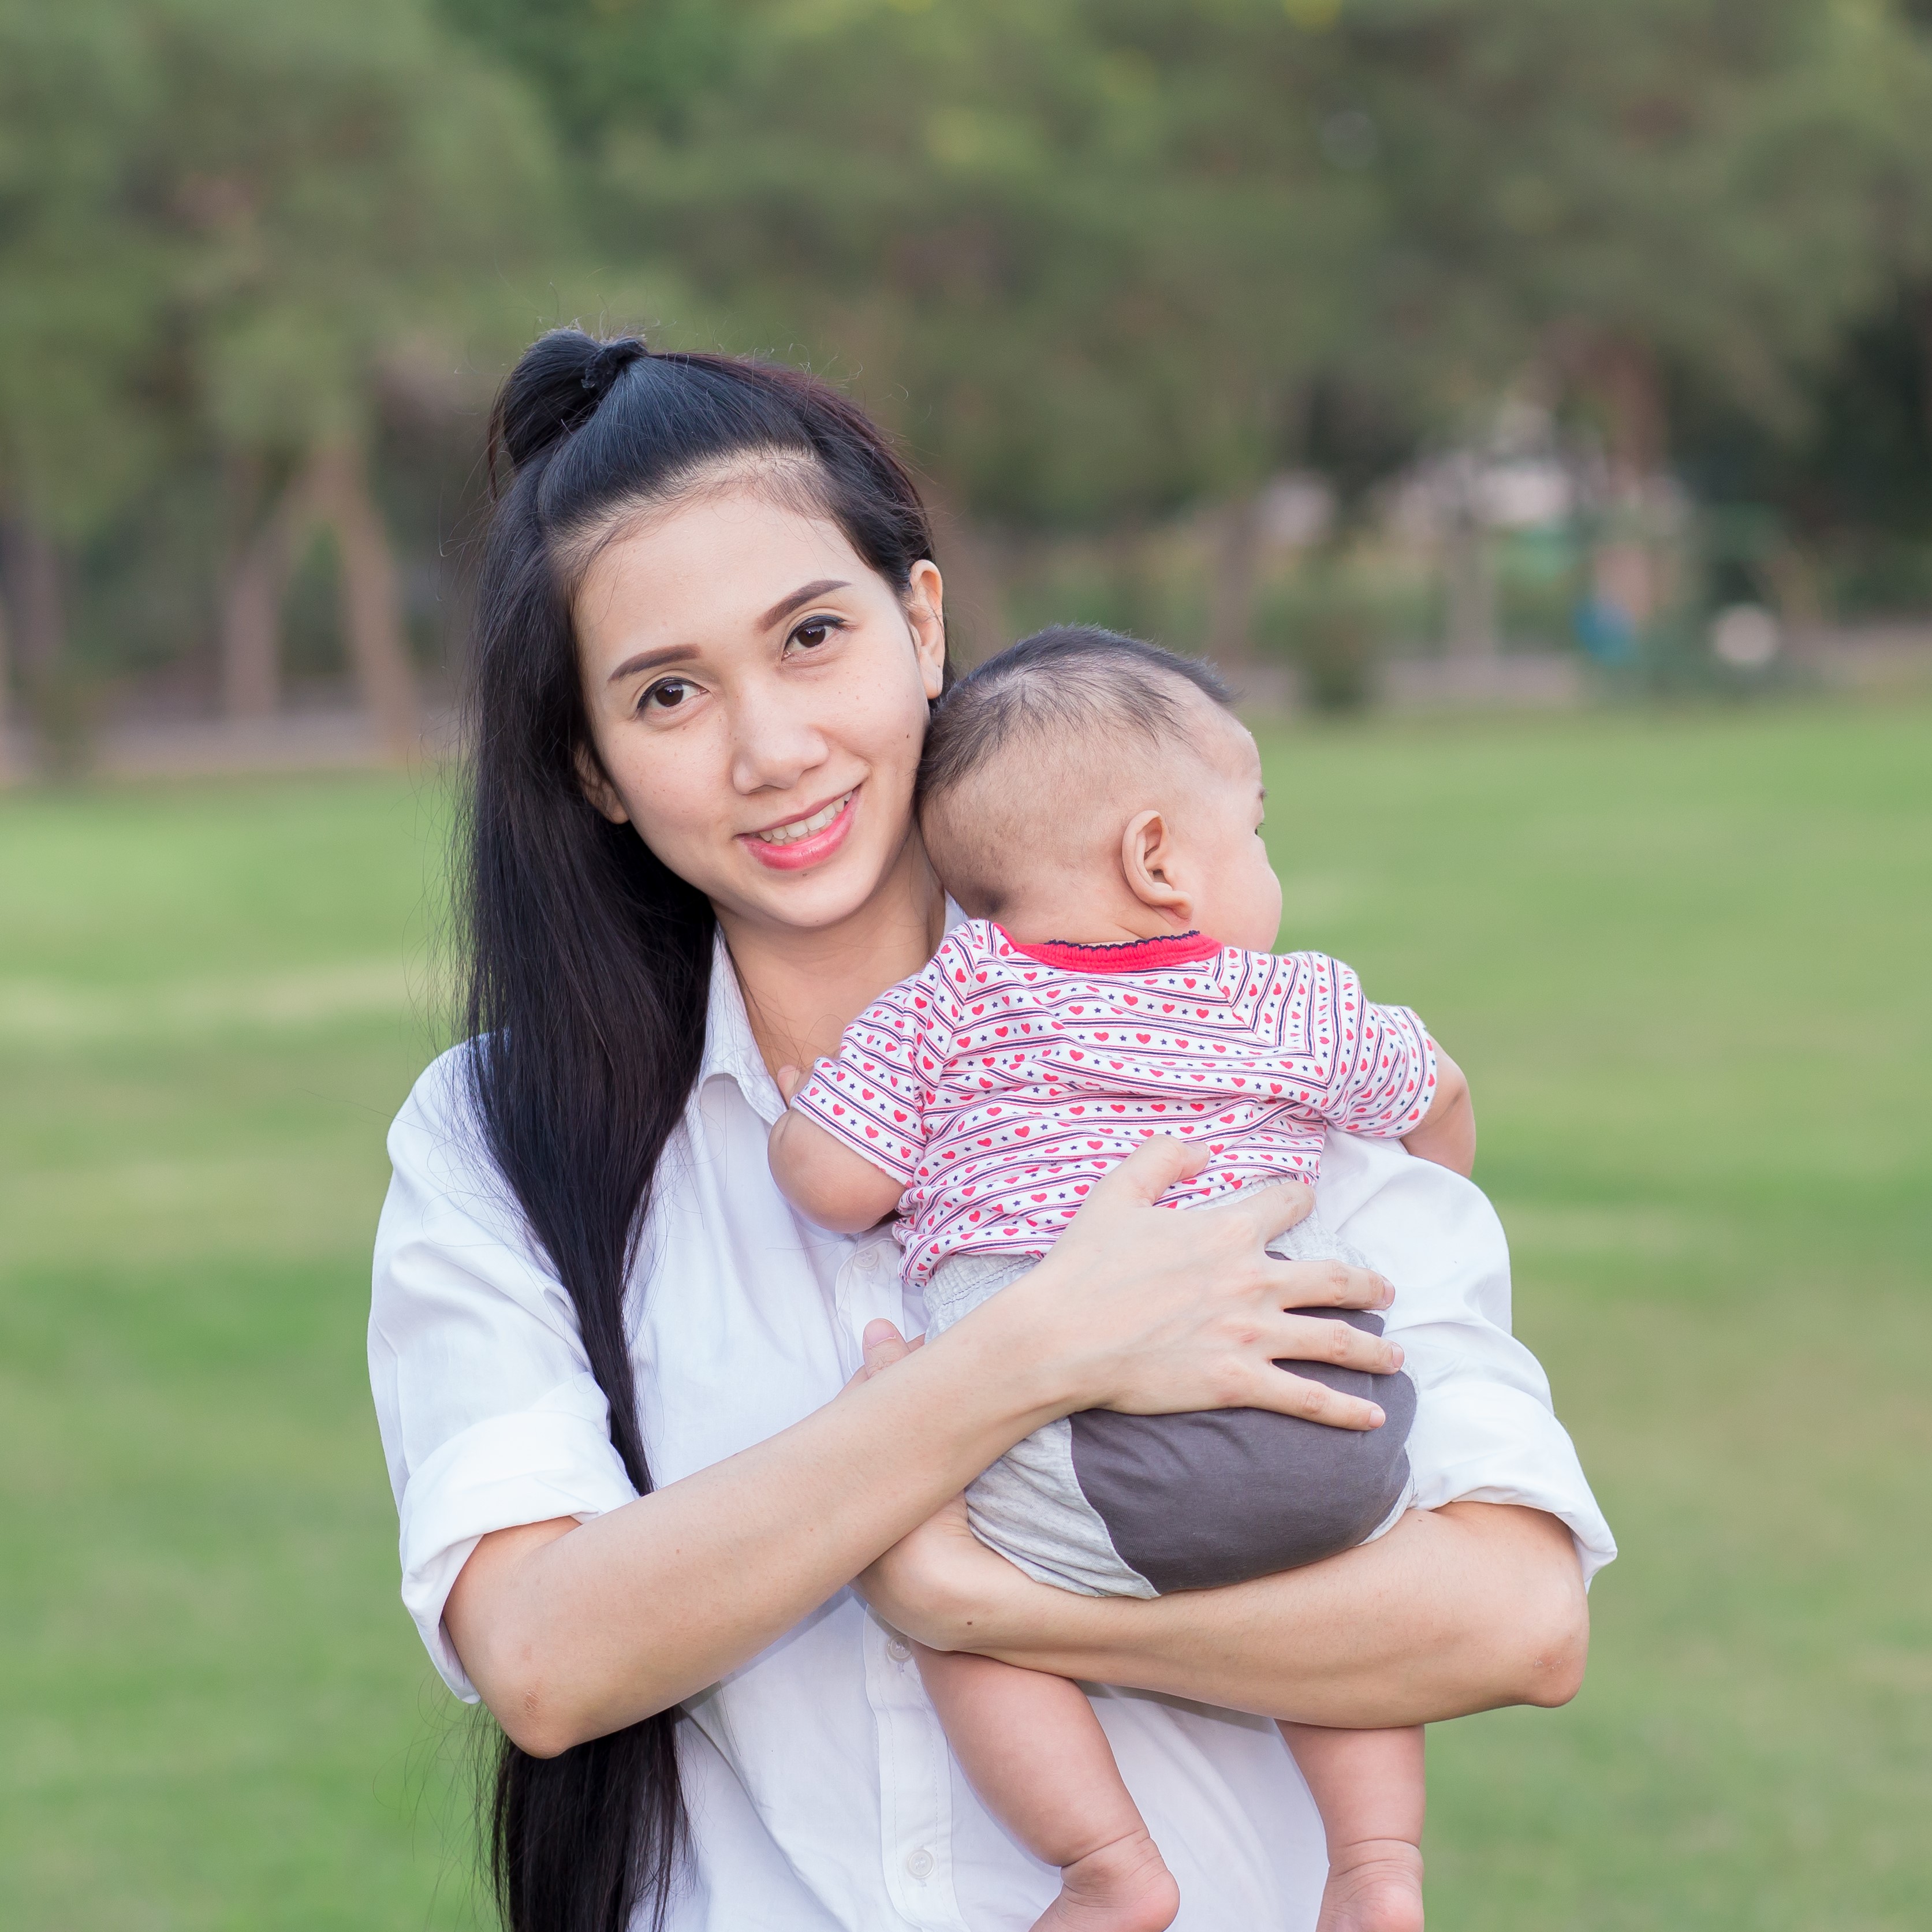 Smiling woman holding baby. Woman appears to be Asian American. 